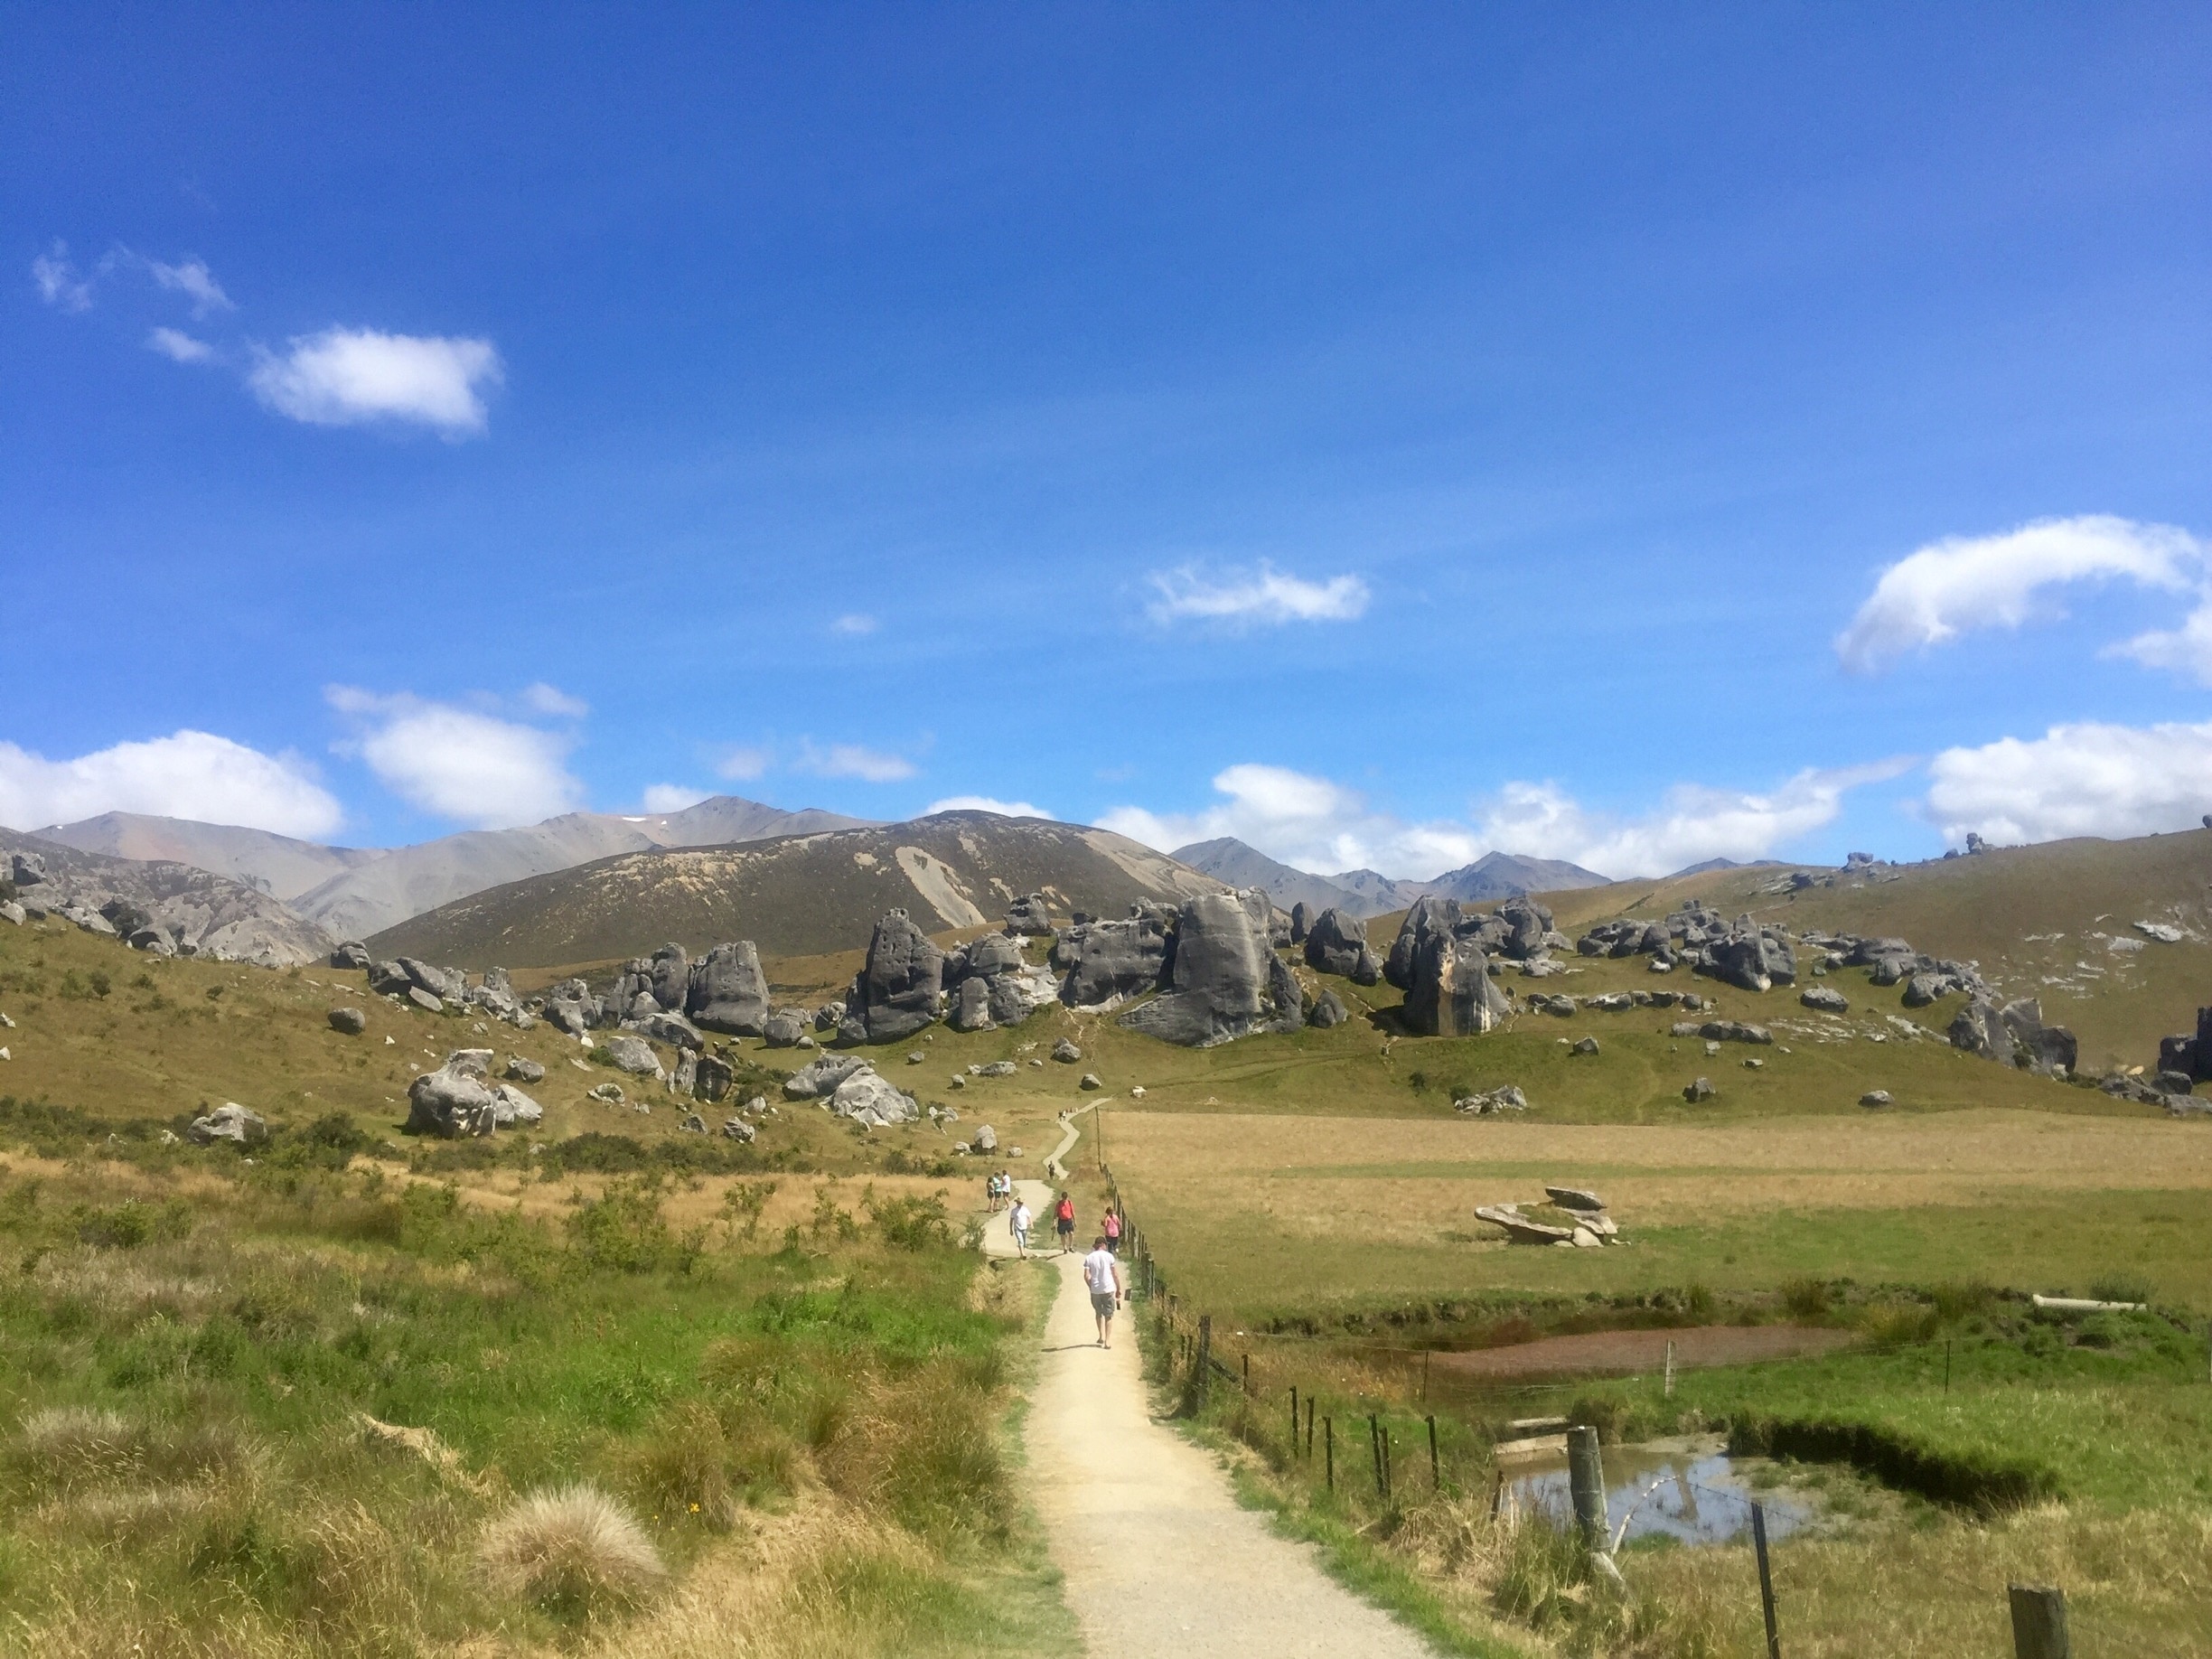 Castle Hill Vacation Rentals & Homes - Canterbury, New Zealand